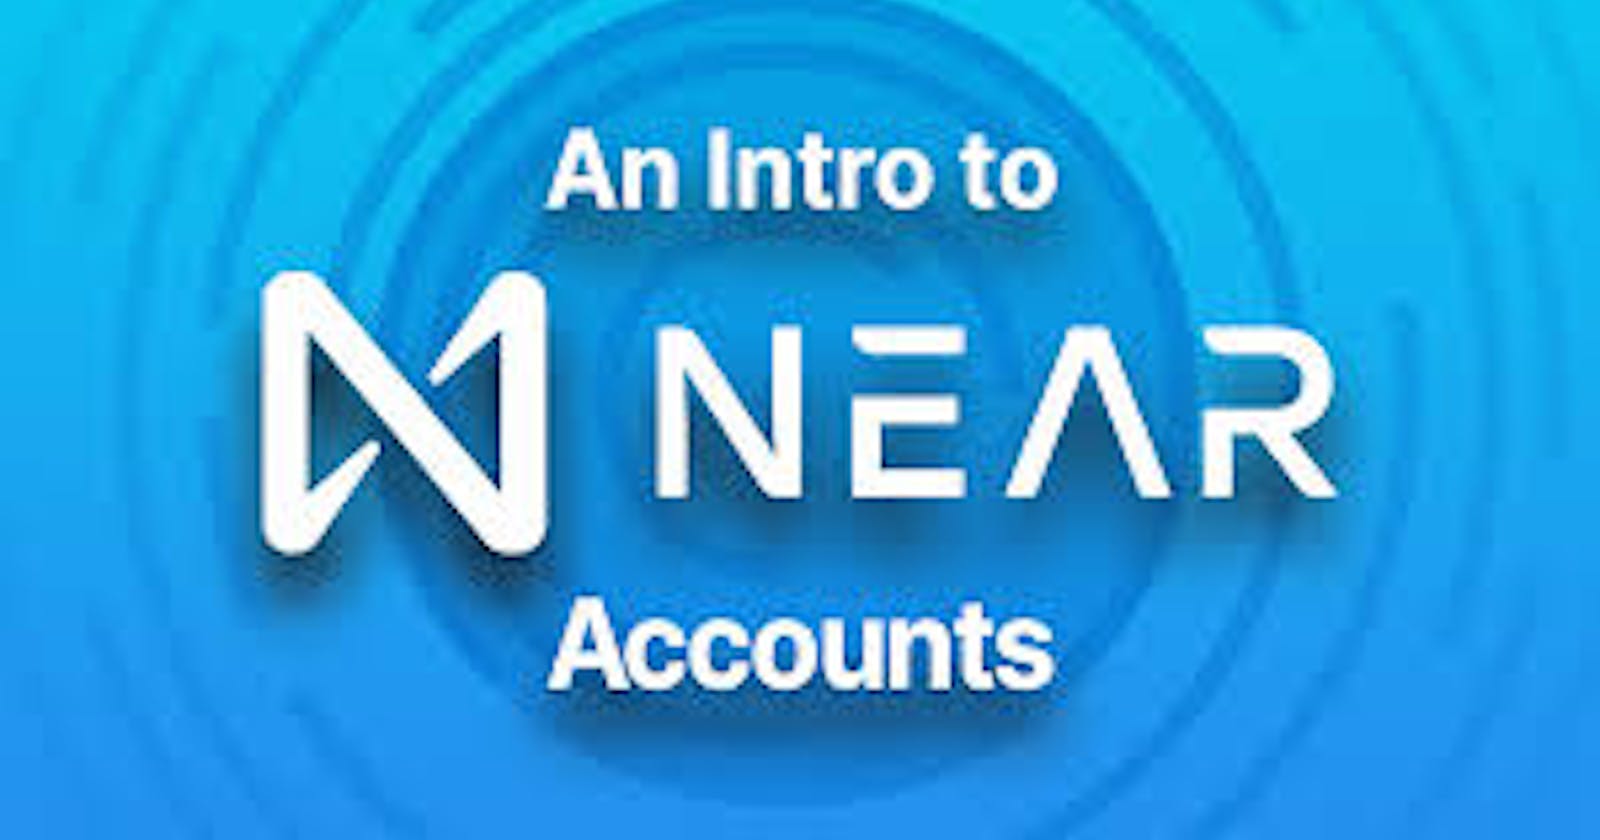 Have you heard of the Near accounts model